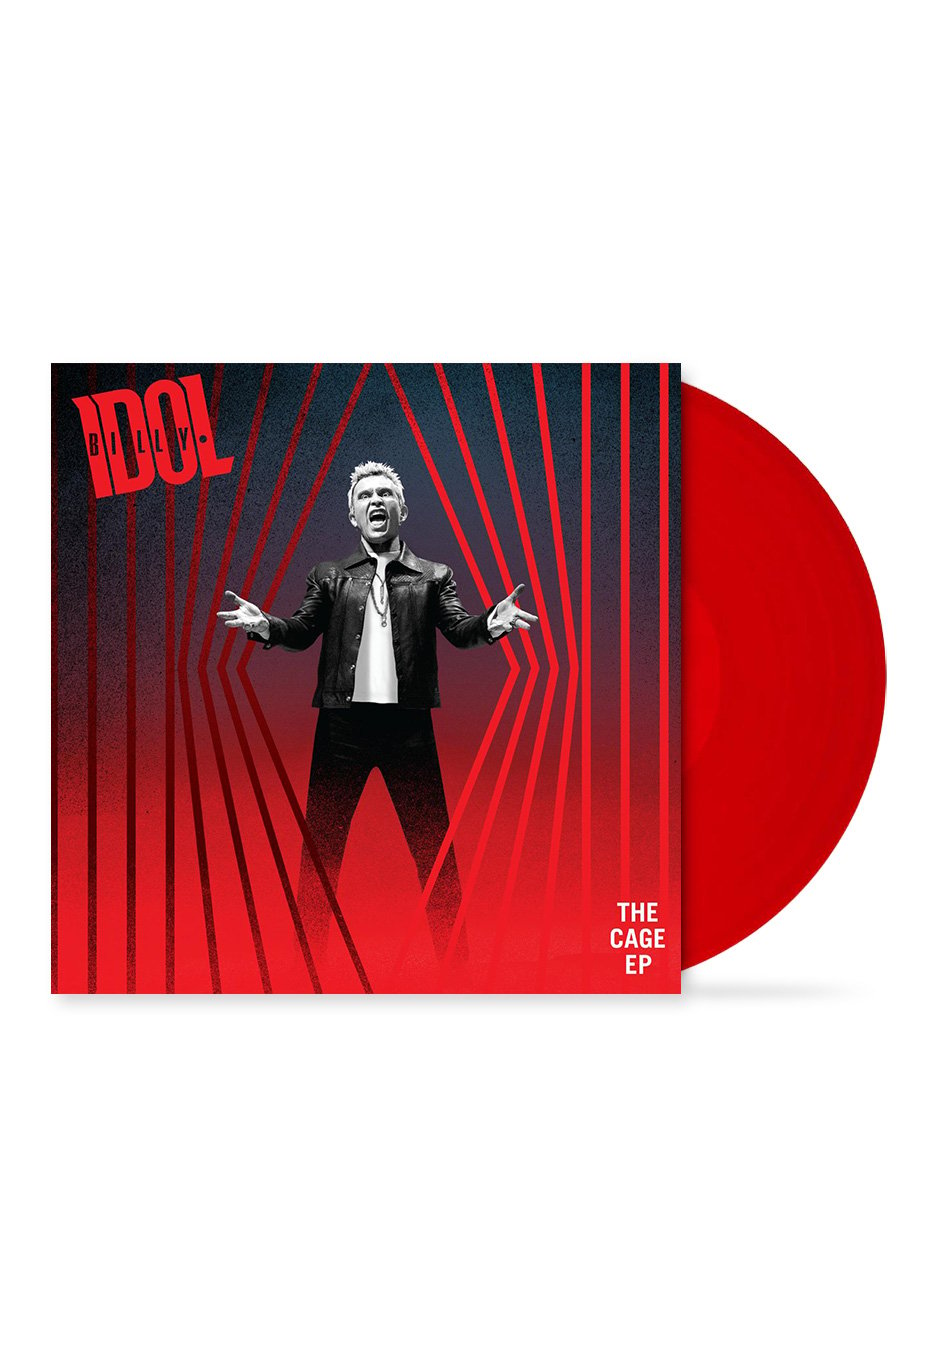 Billy Idol - The Cage EP Red - Colored Vinyl